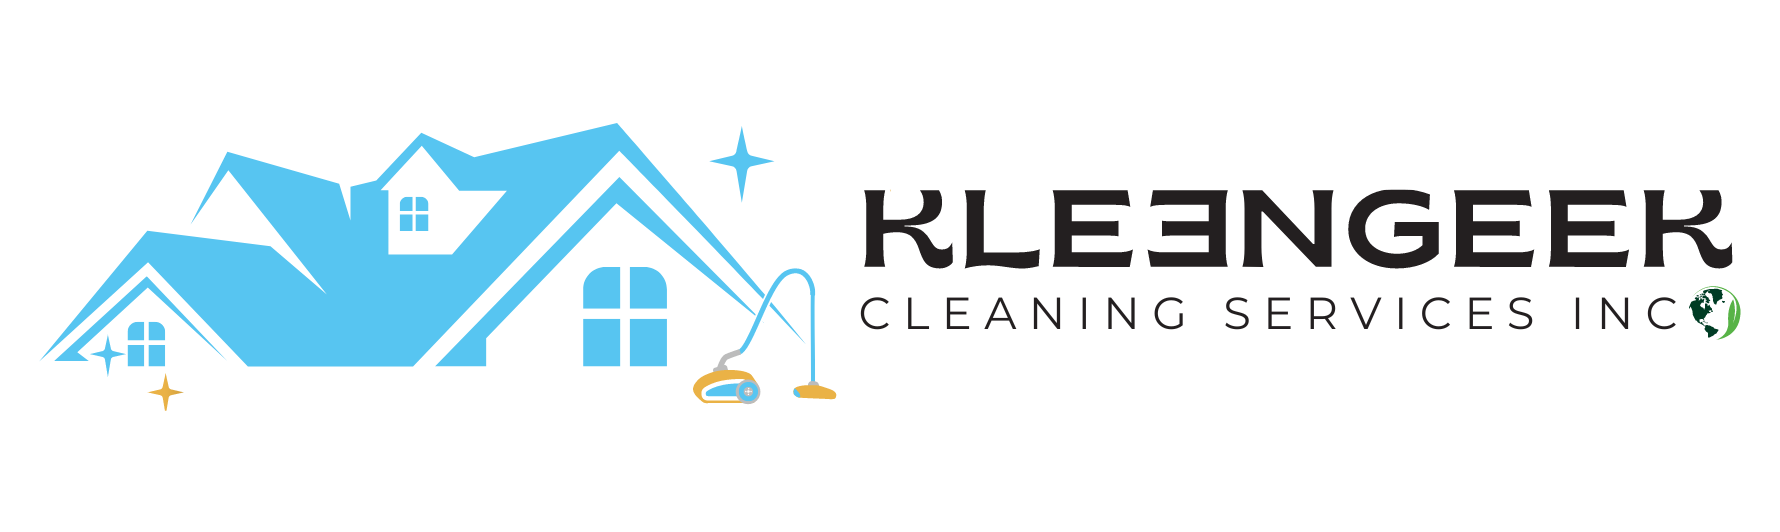 KleenGeek Cleaning Services Inc.